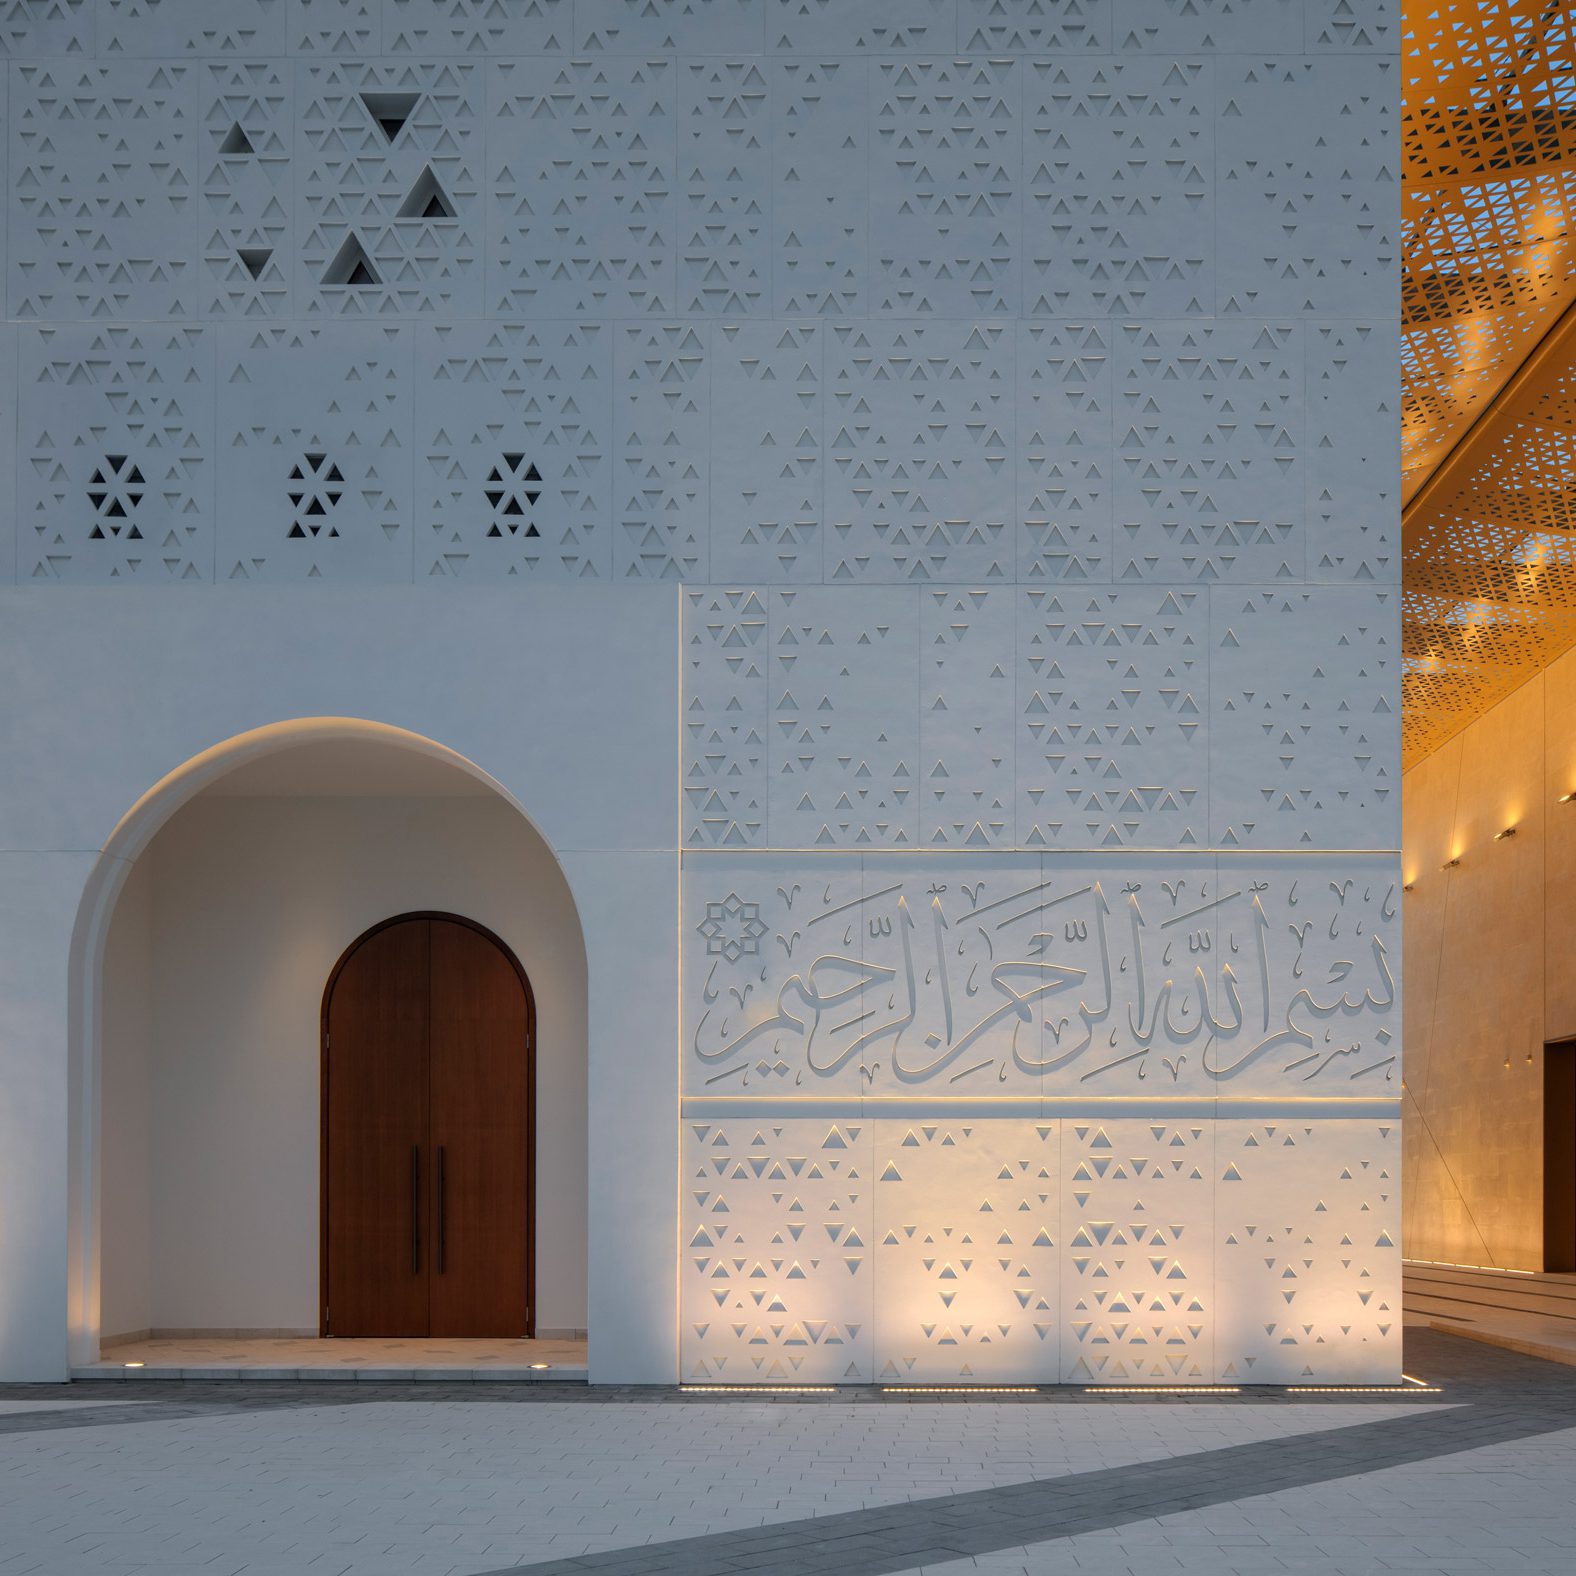 Mosque of the Late Mohamed Abdulkhaliq Gargash in Dubai by Dabbagh Architects